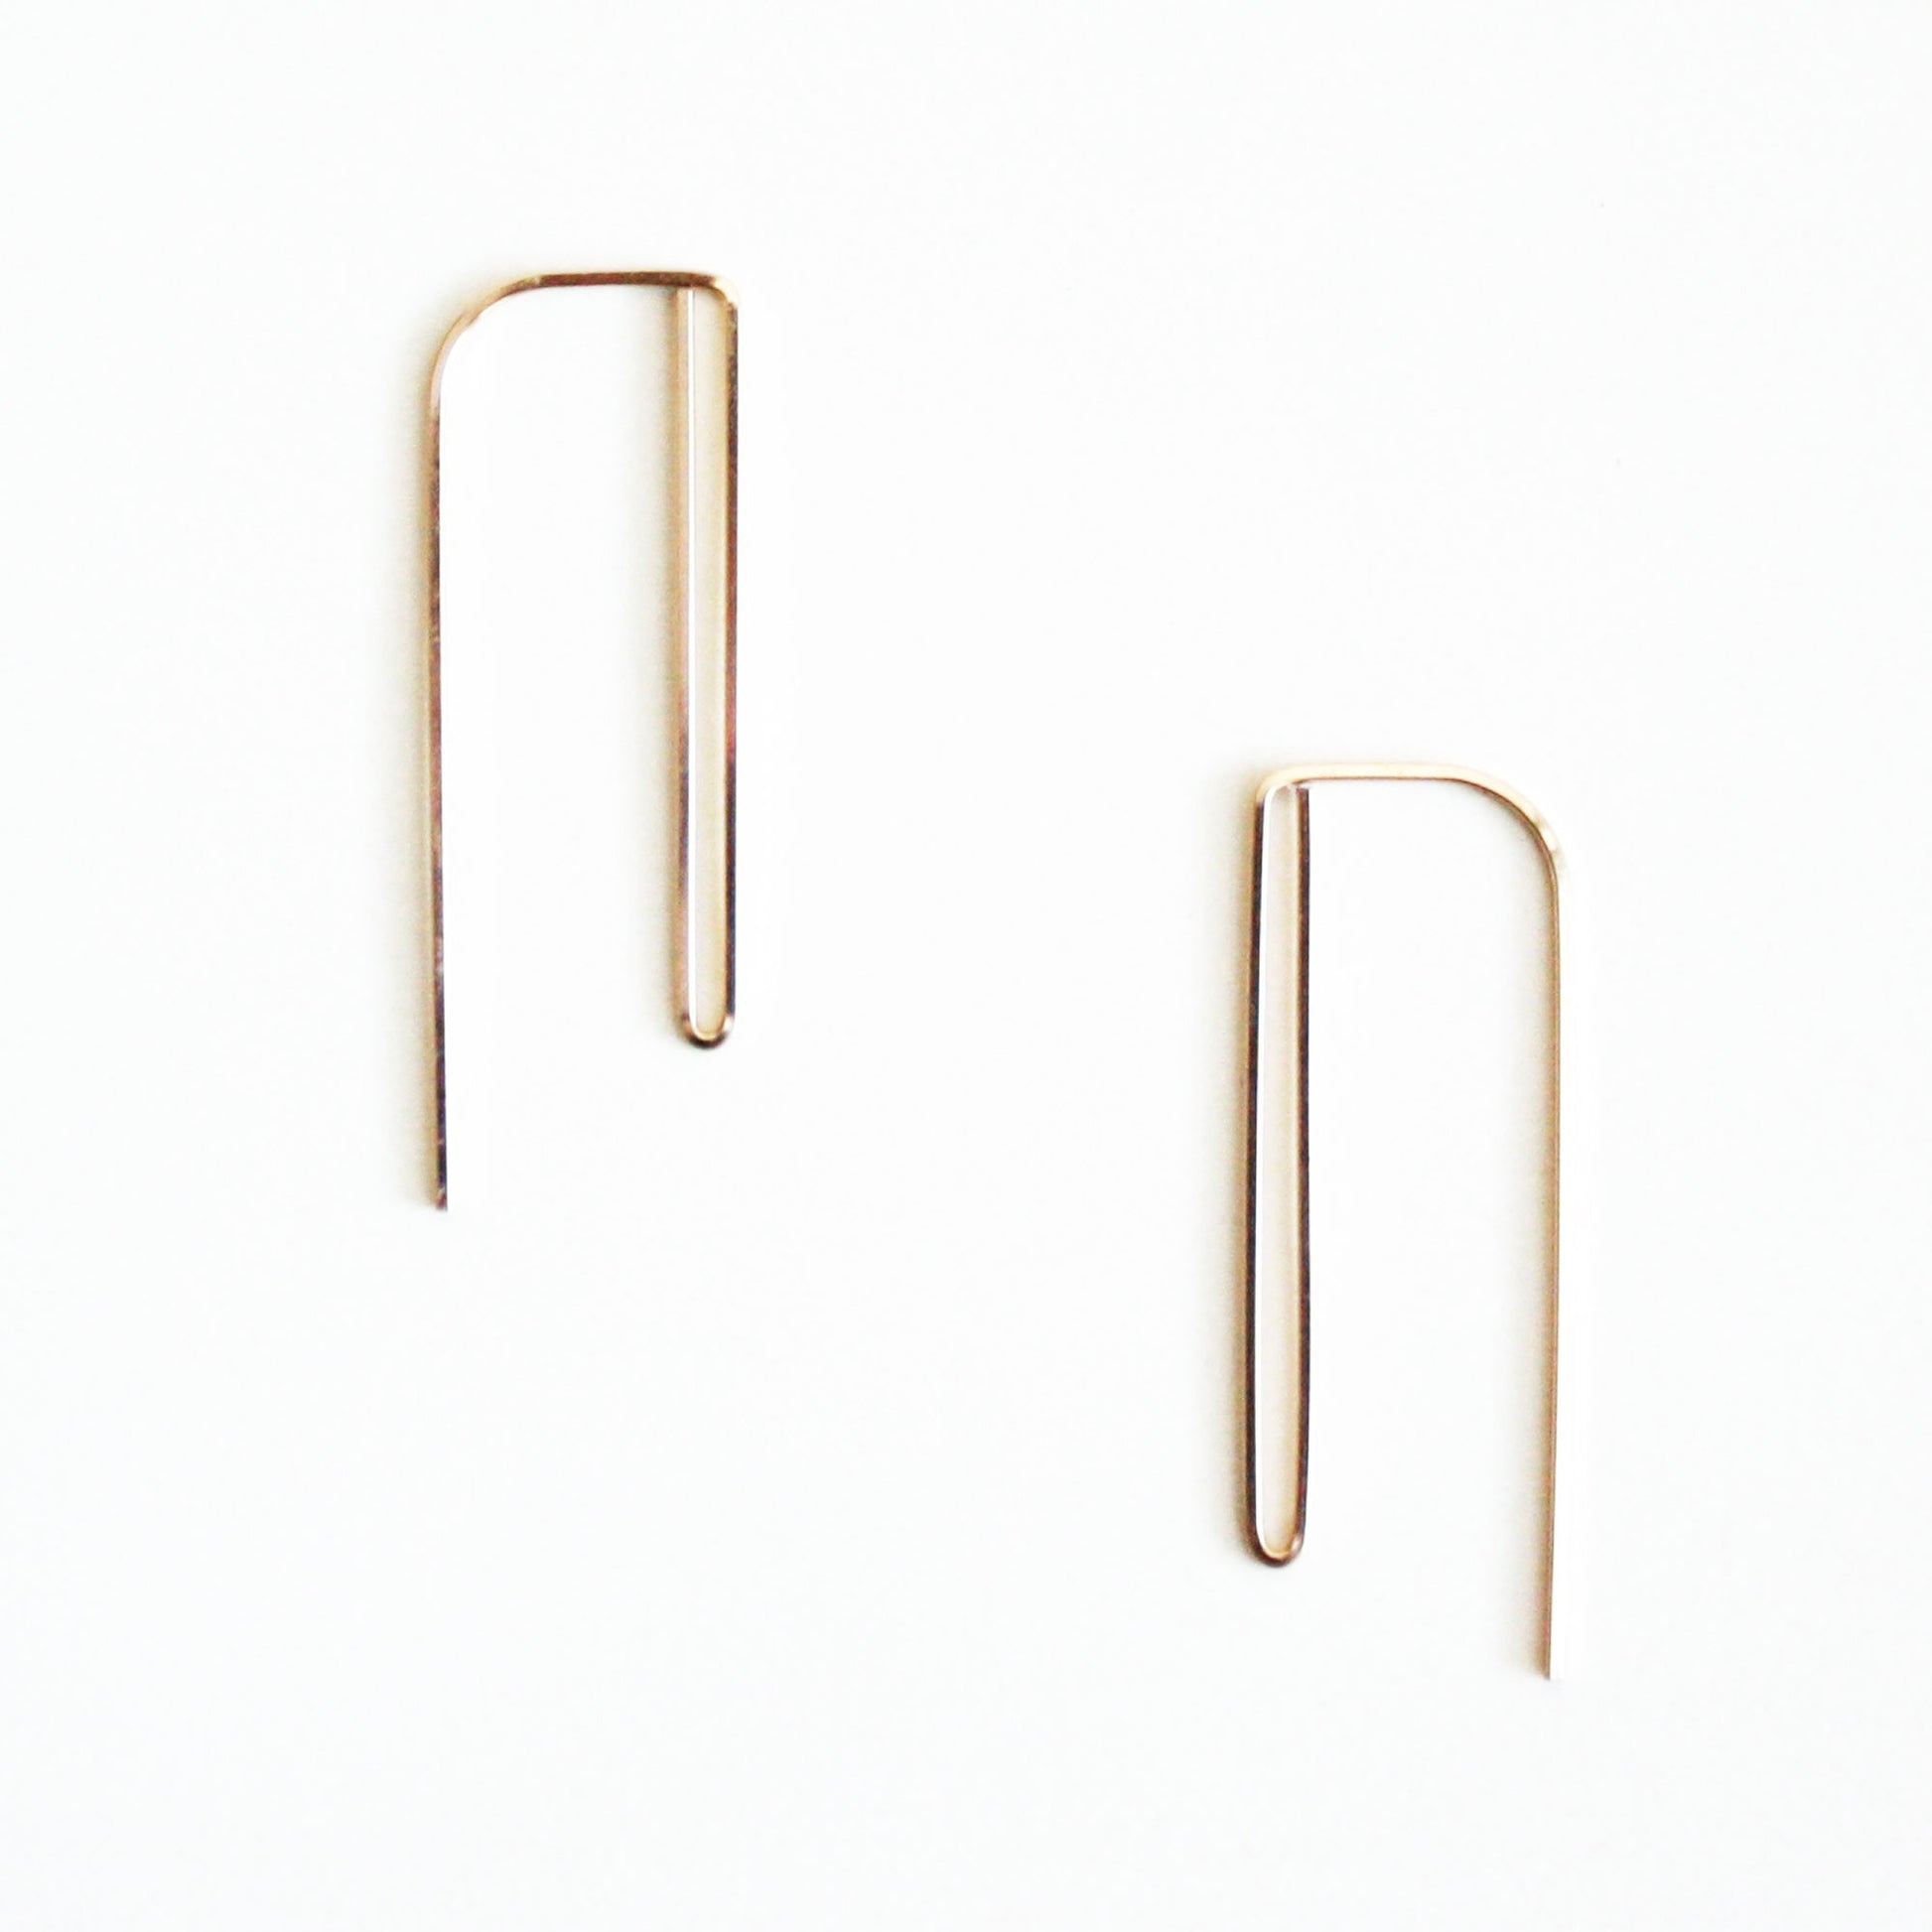 Long Double Bar Threader Earrings | 14K Gold Filled or Sterling Silver Sterling Silver